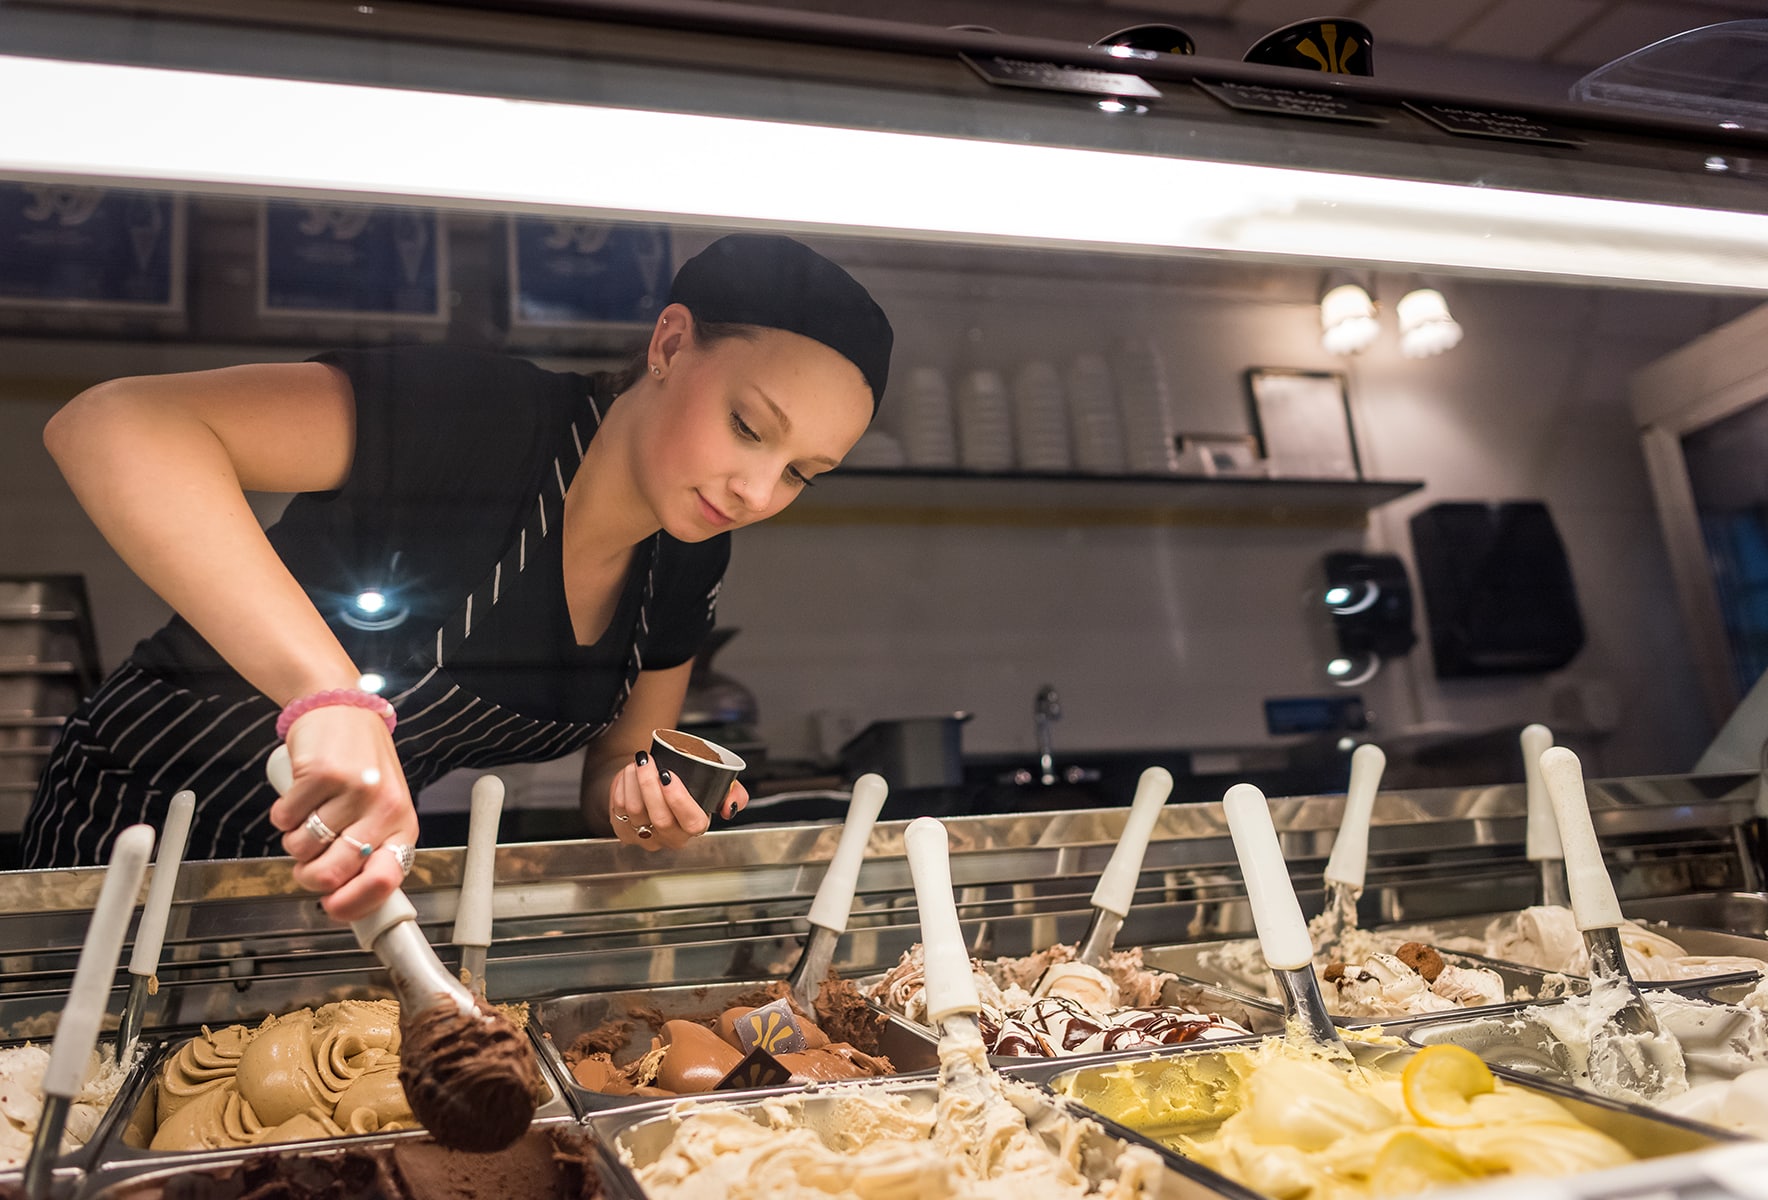 Leah Shipulski of Etna, NH scoops up a serving of chocolate at Morano Gelato.